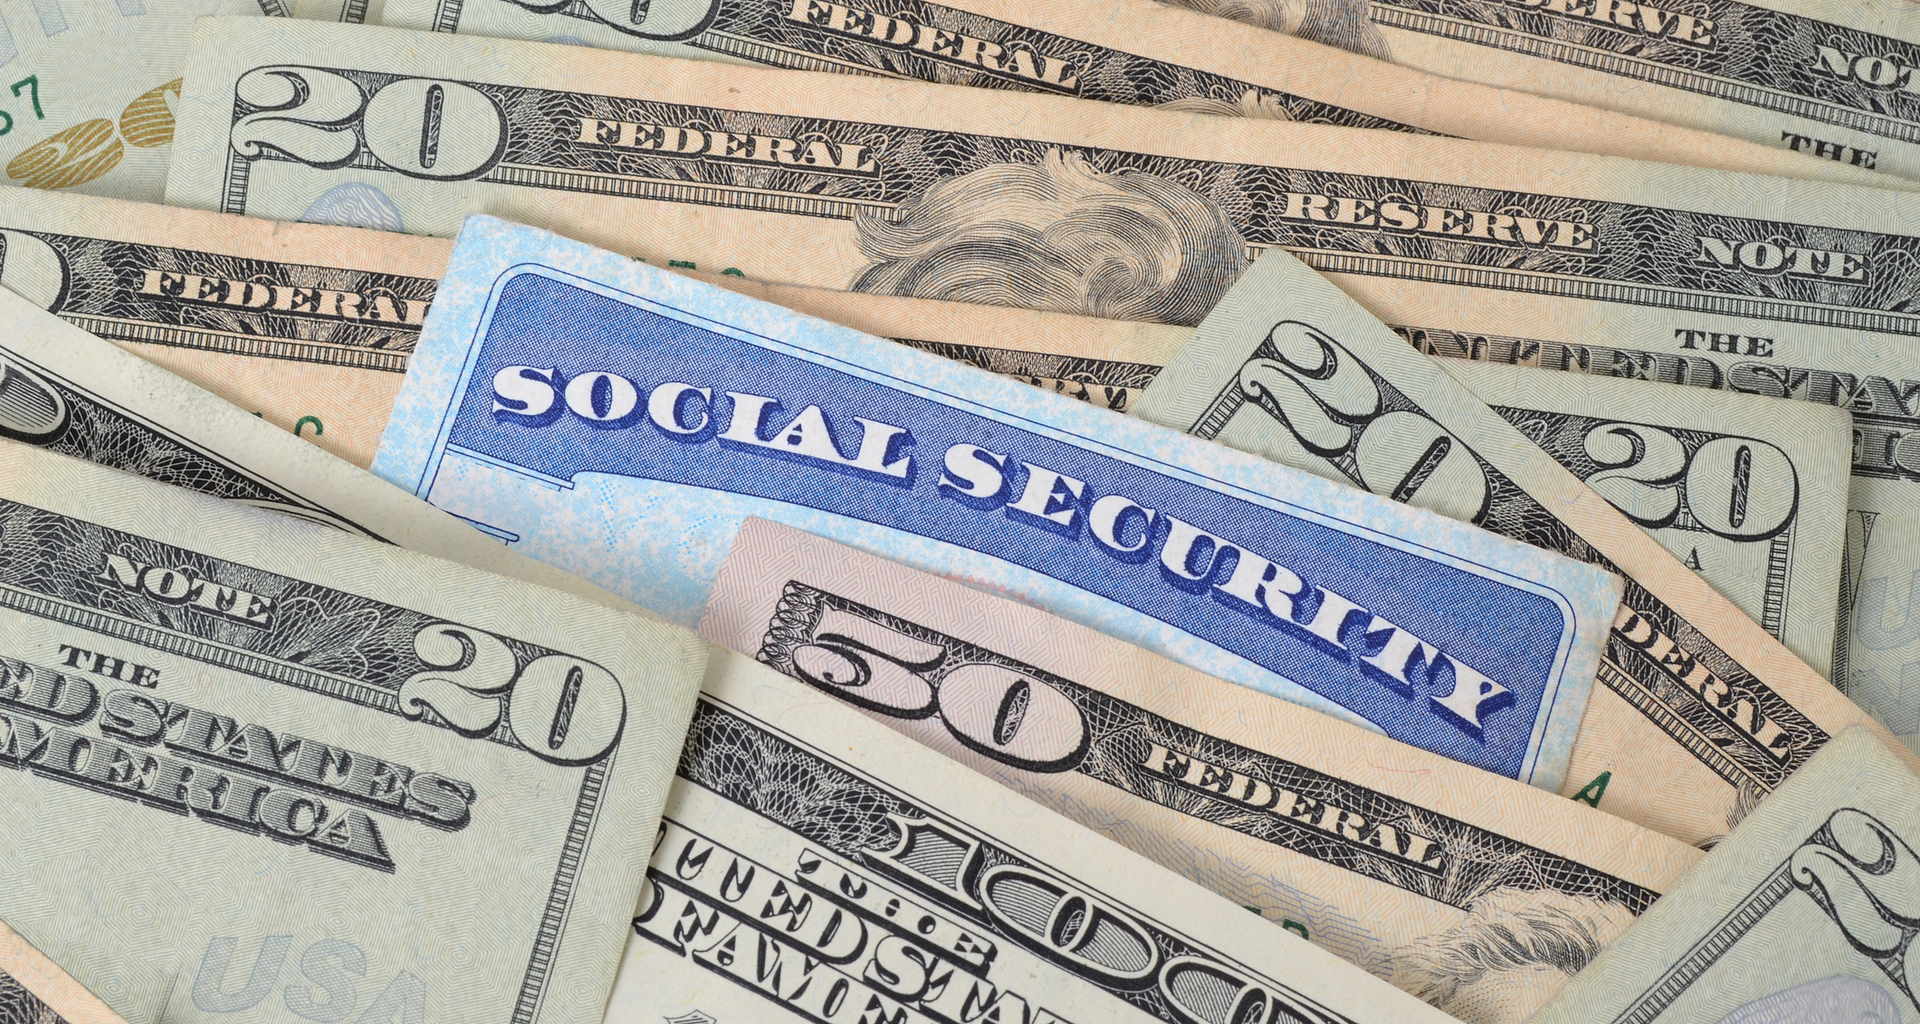 social security card and cash